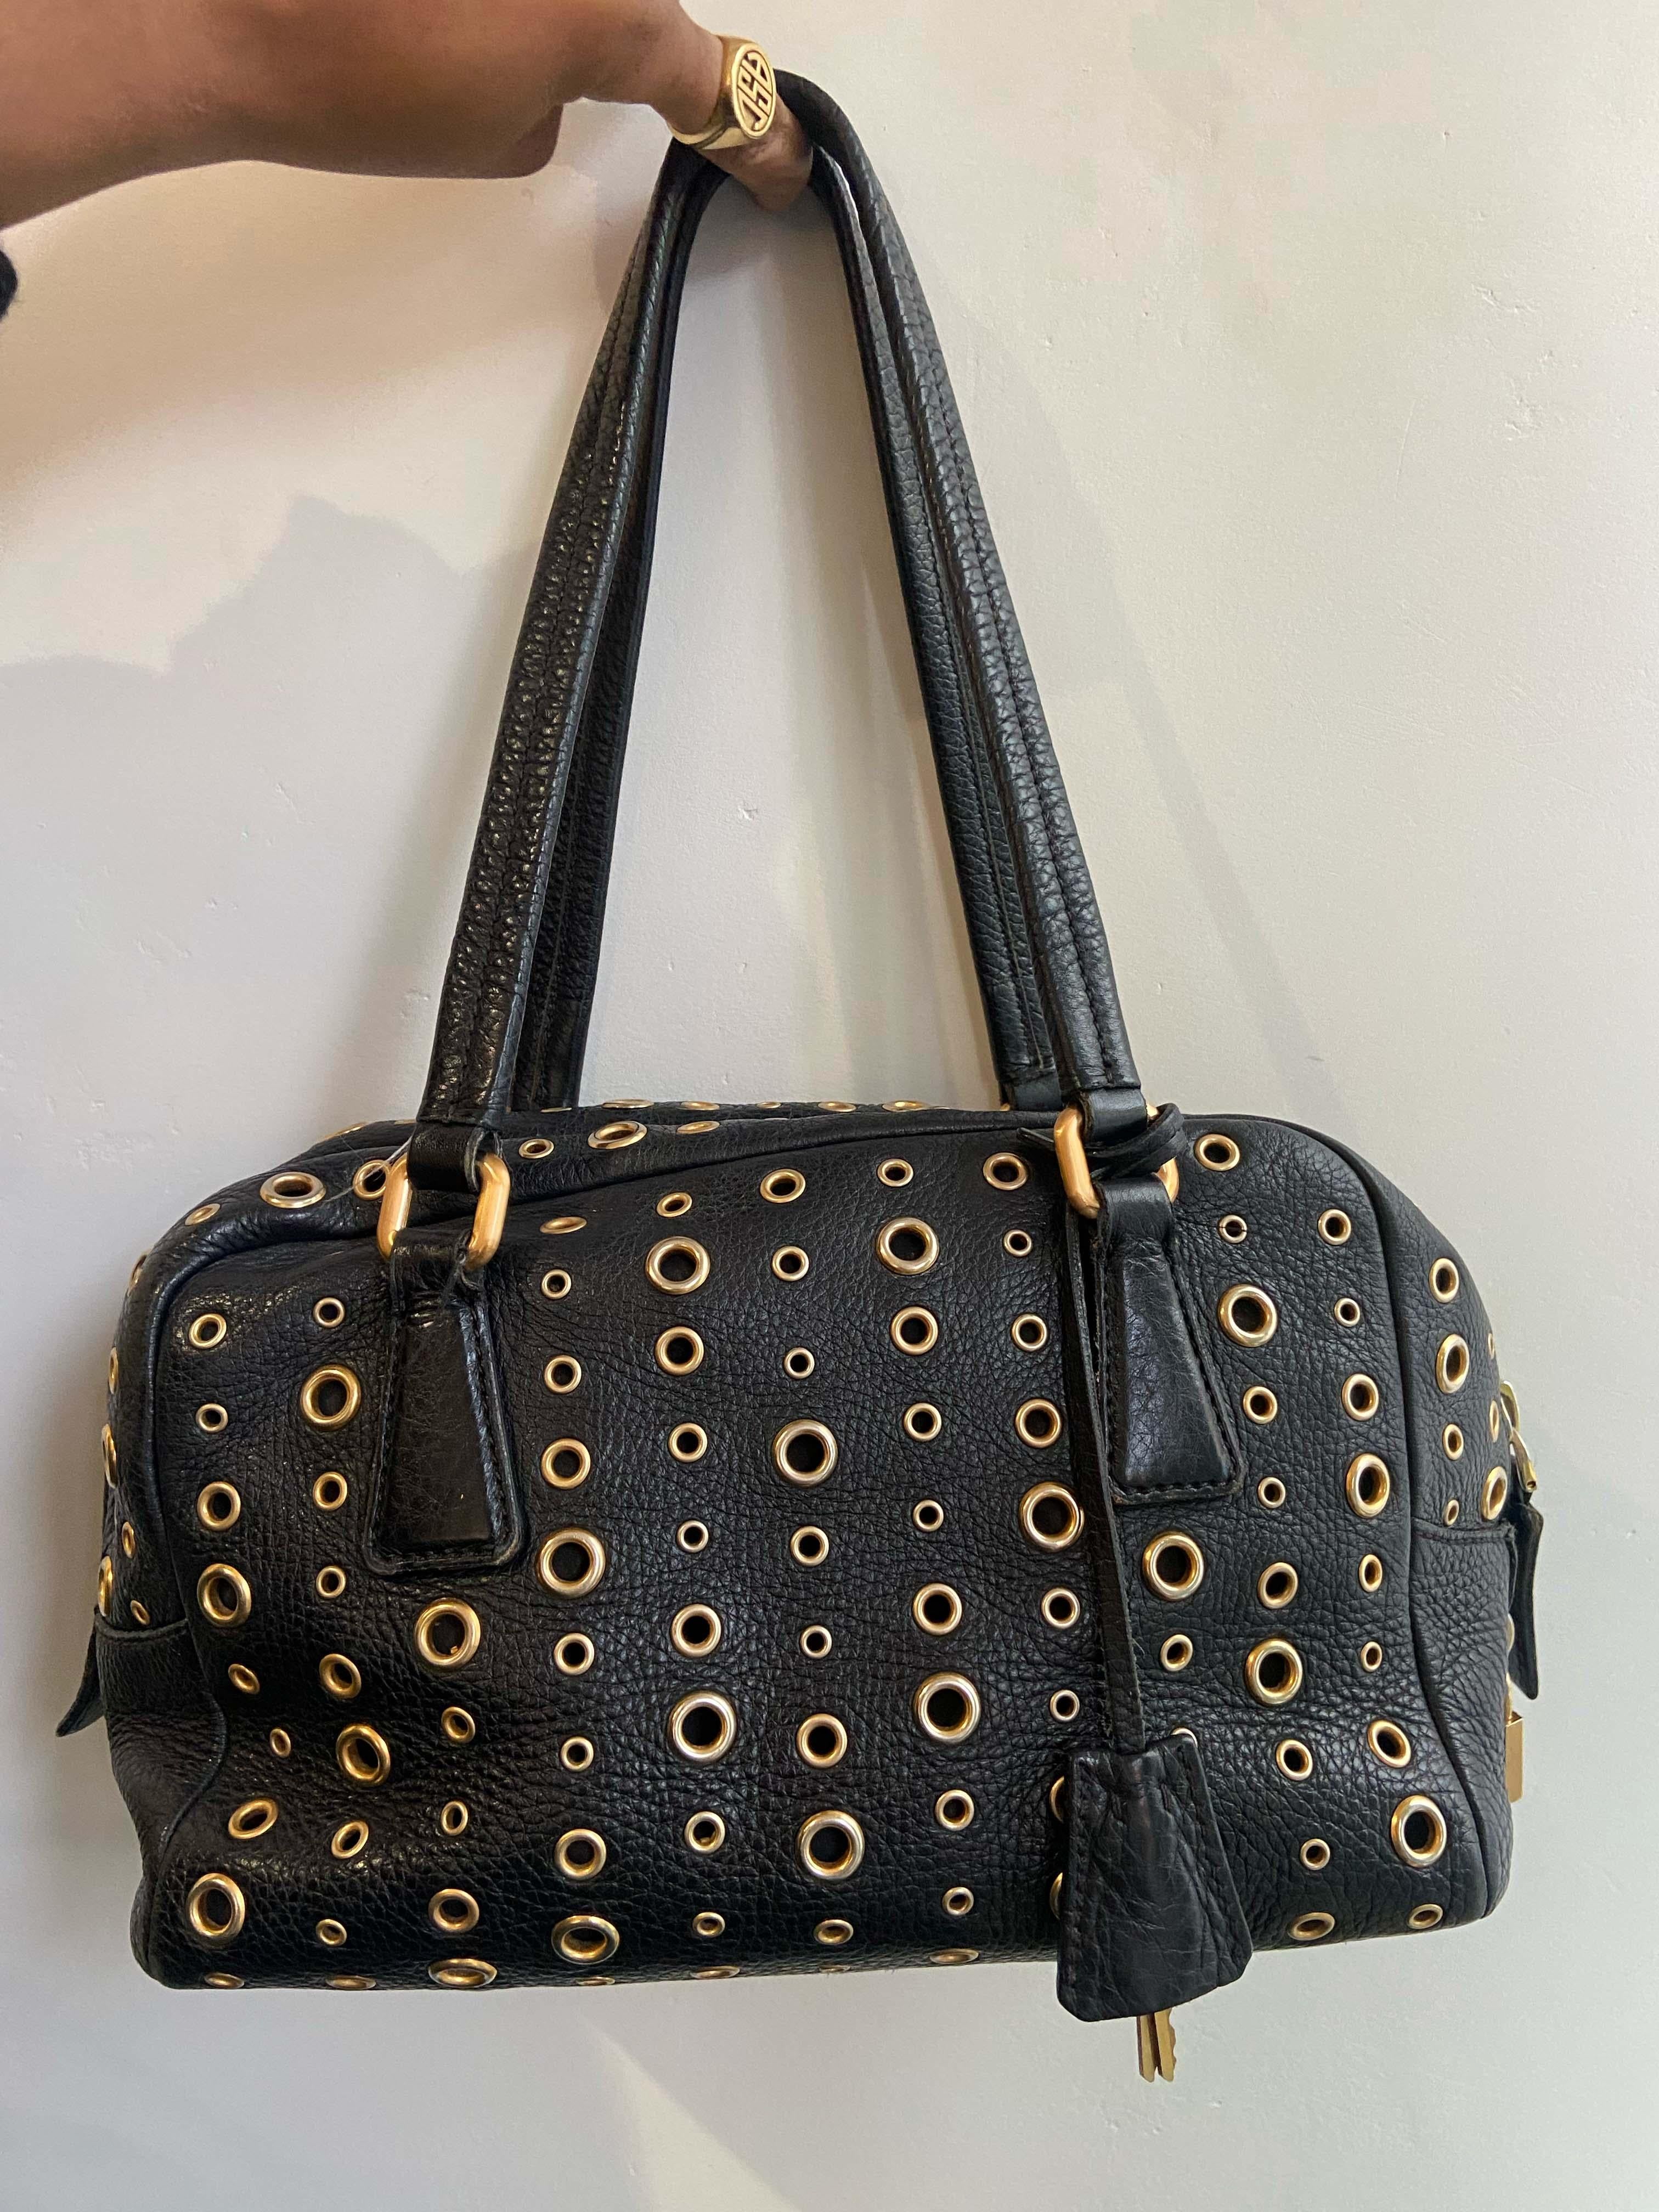 Vintage Prada 2000's Grommet Bauletto, bag. Features black leather with gold eyelets allover, gold tag lock and key. Inner zip back pocket. Leather straps. Fastens with zip closure. 

Brand: Prada
Color: Black&Gold
Fabric: Leather
Year / Season: